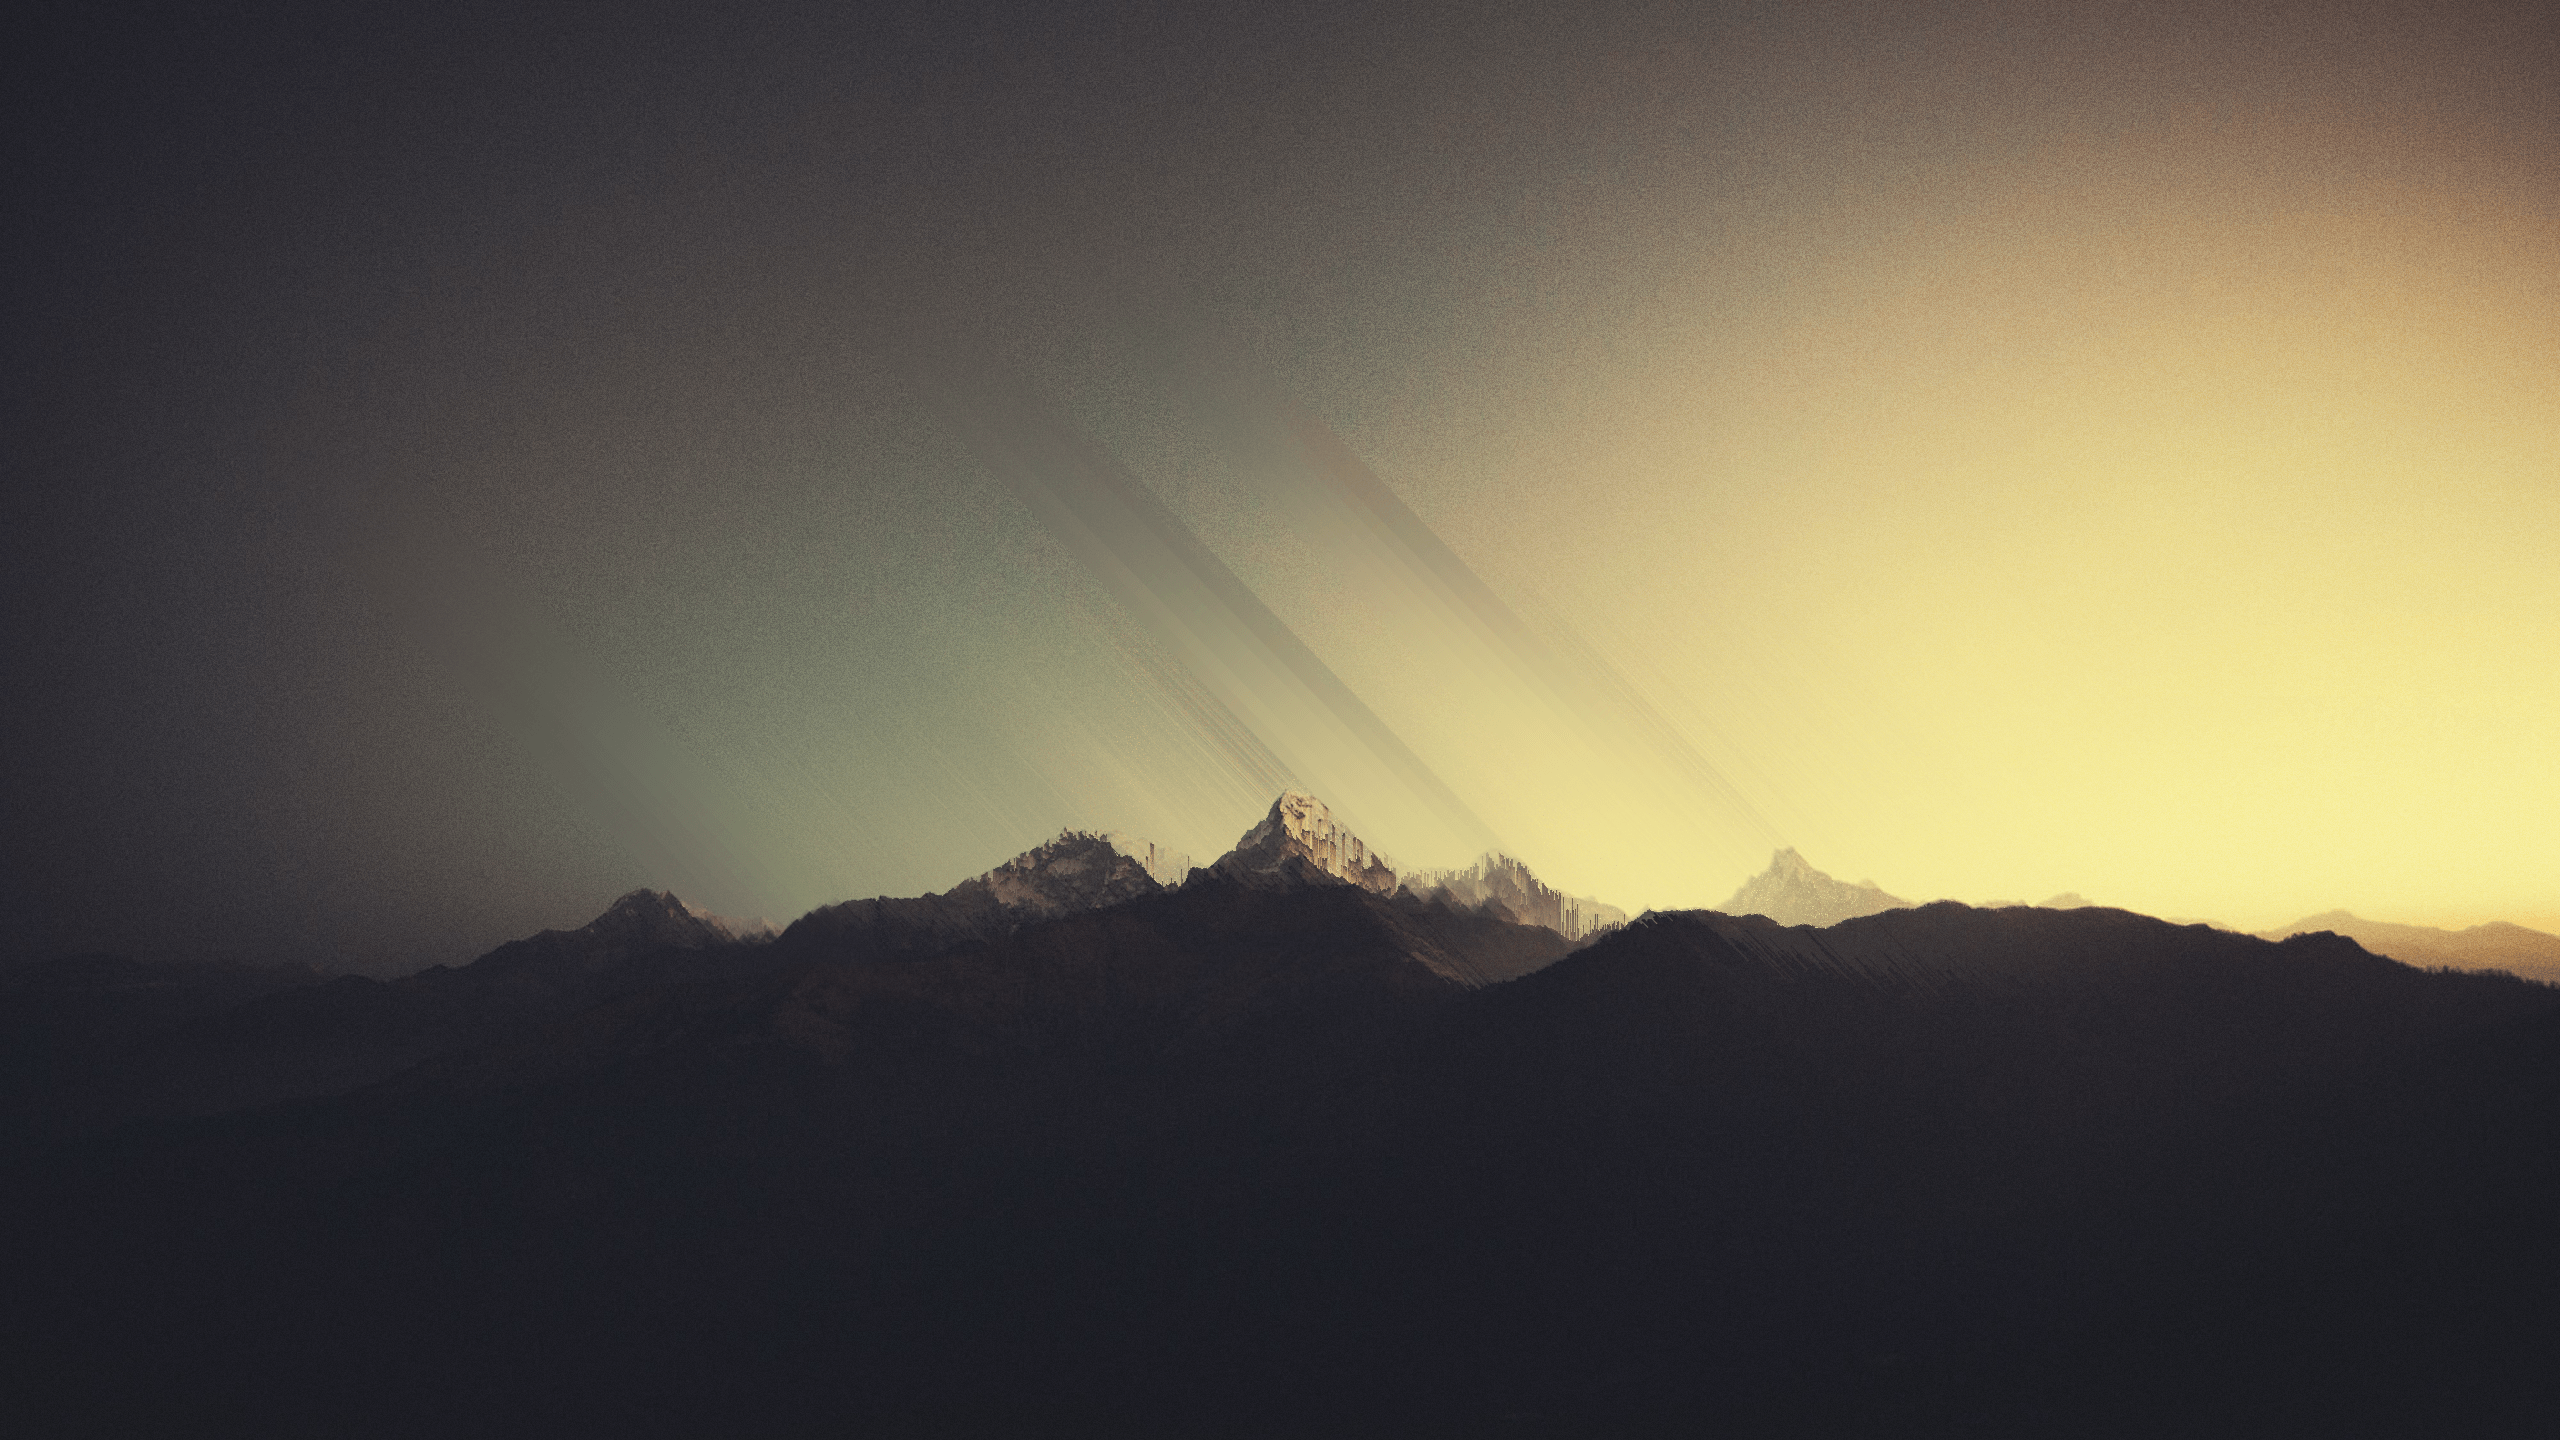 Abstract Mountains [1920x1080]